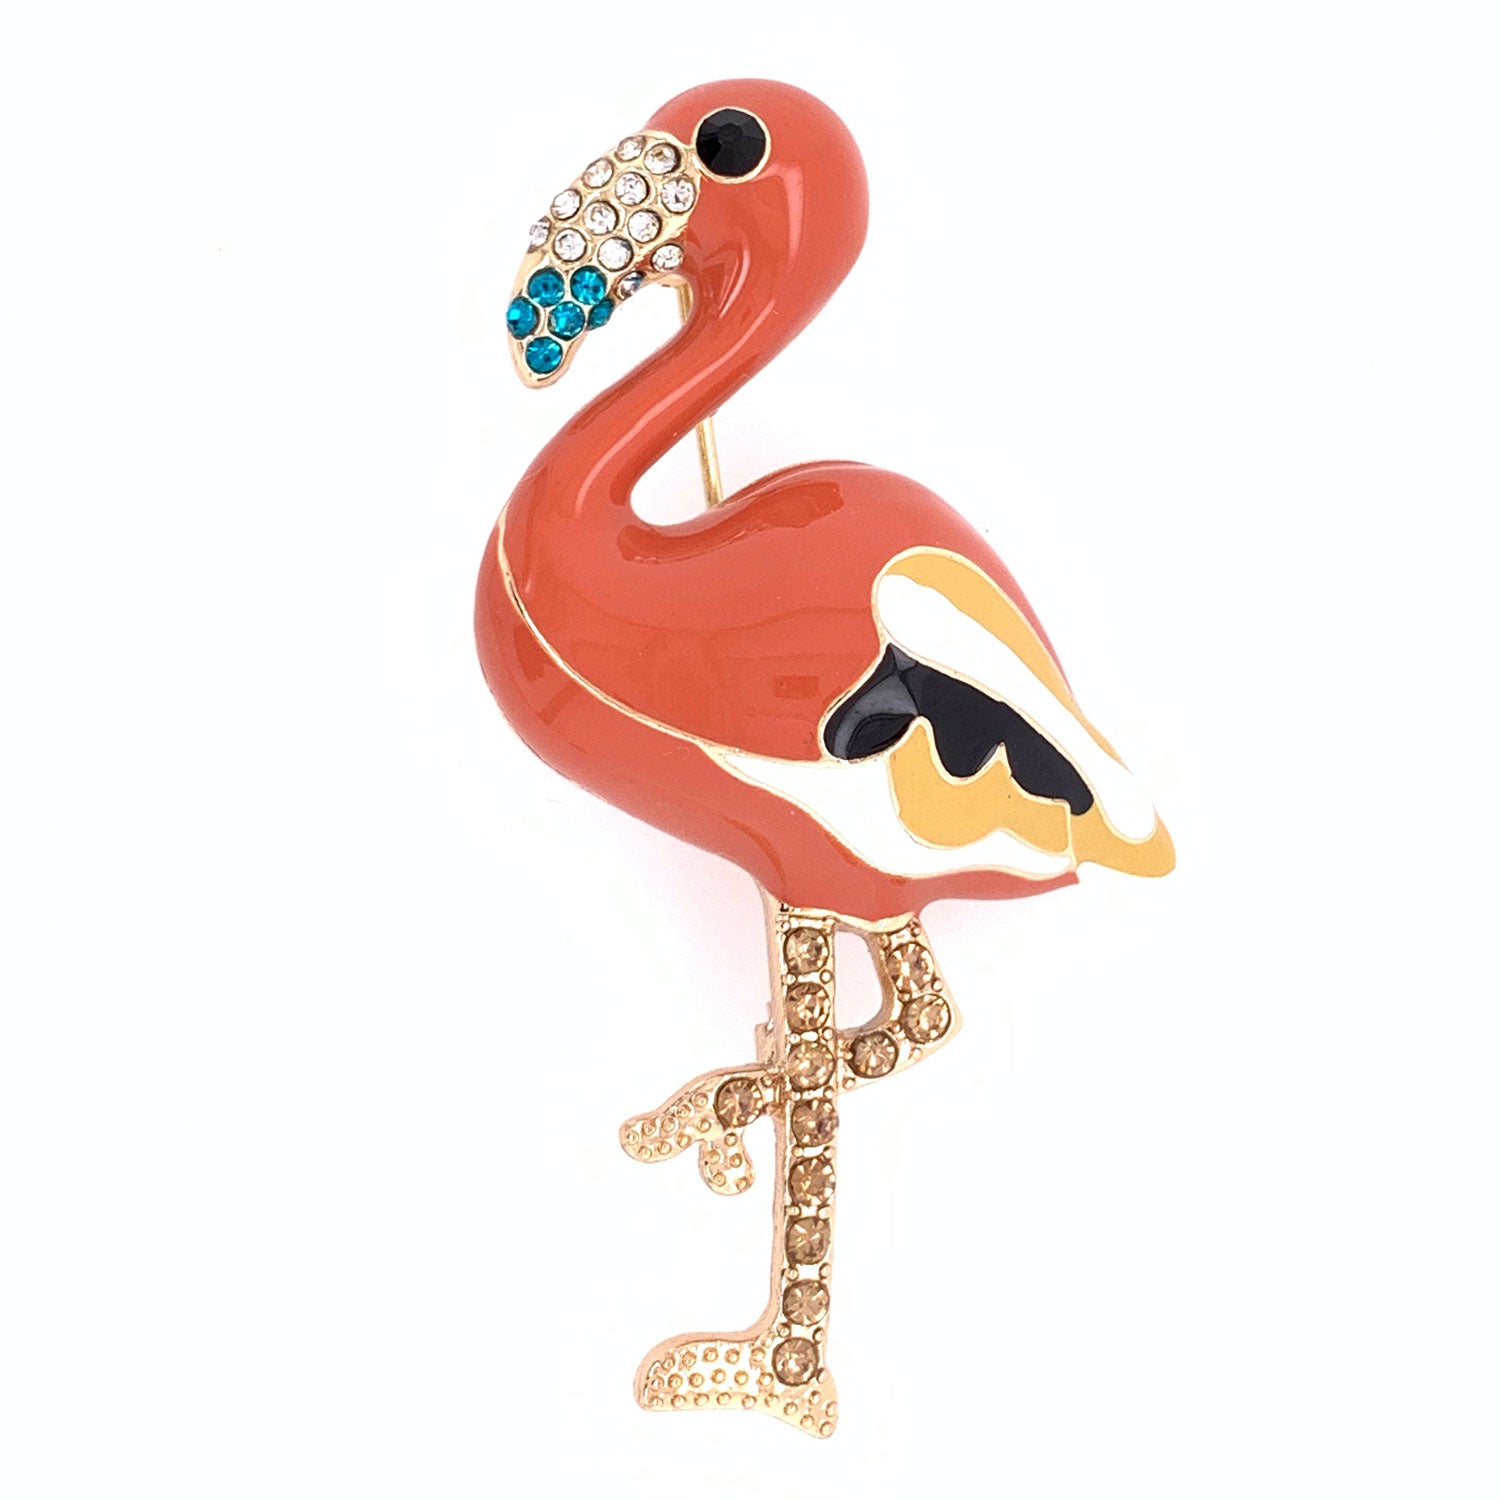 Flamingo Brooch Pin Fashionable Beadsland Alloy Inlaid Rhinestone Brooch  Pin Model For High End Clothing Accessories Perfect Womans Gift MM 502 From  Royaldavid, $11.91